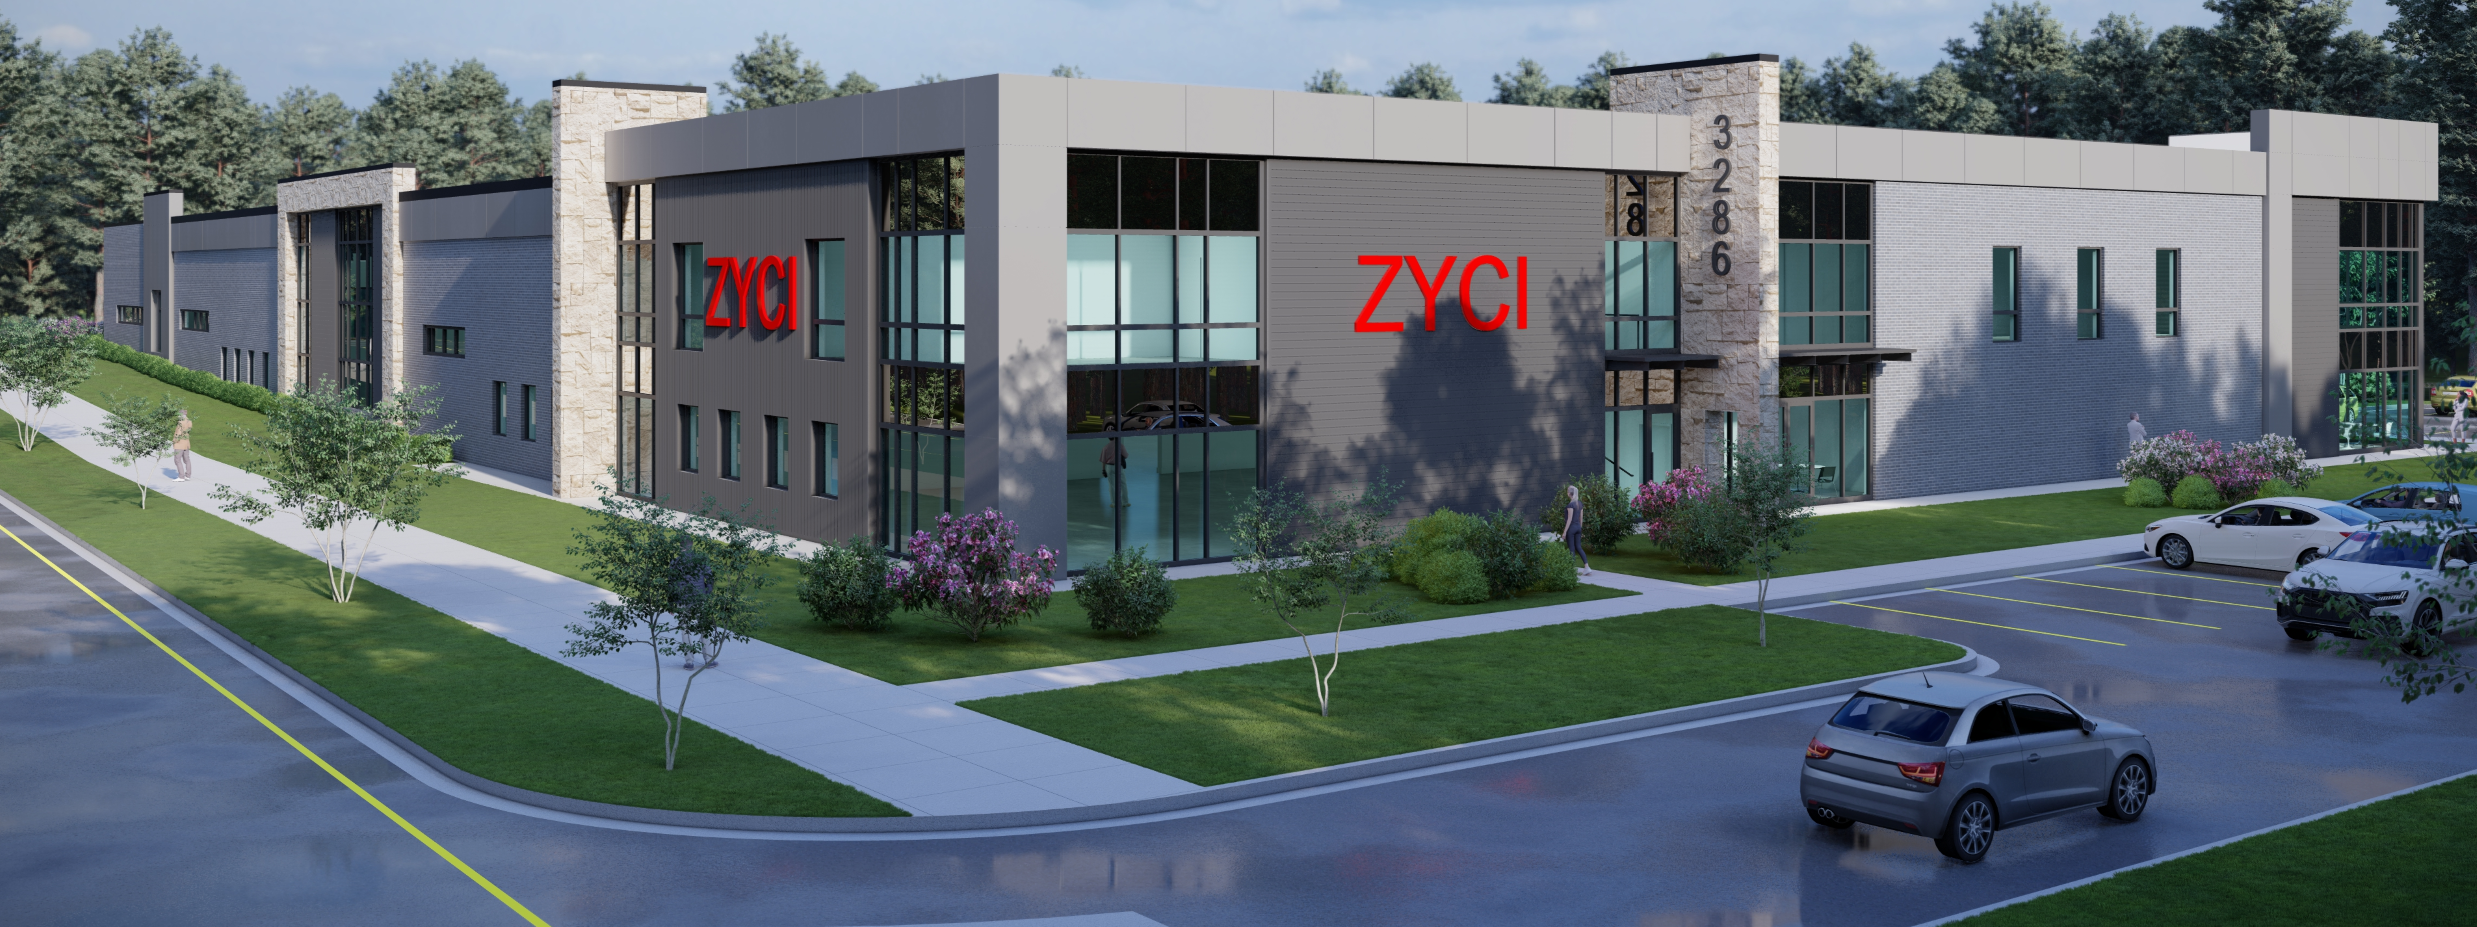 ZYCI Announces Groundbreaking for State-of-the-Art CNC Machining Facility